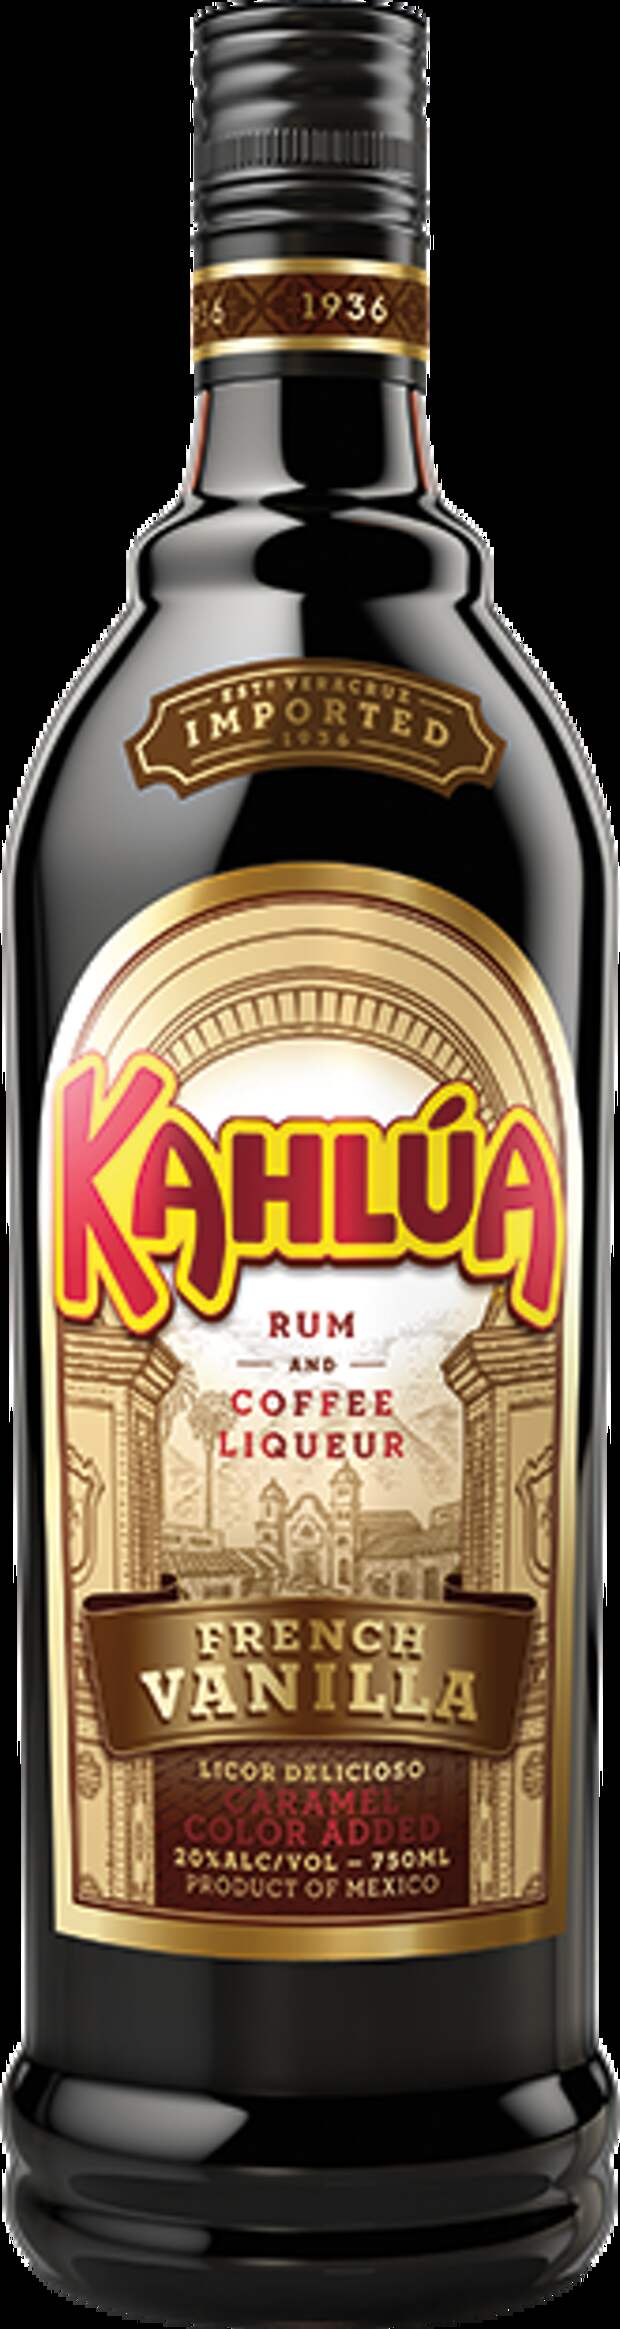 http://www.kahlua.com/globalassets/products/kahlua-french-vanilla.png/ProductSingle